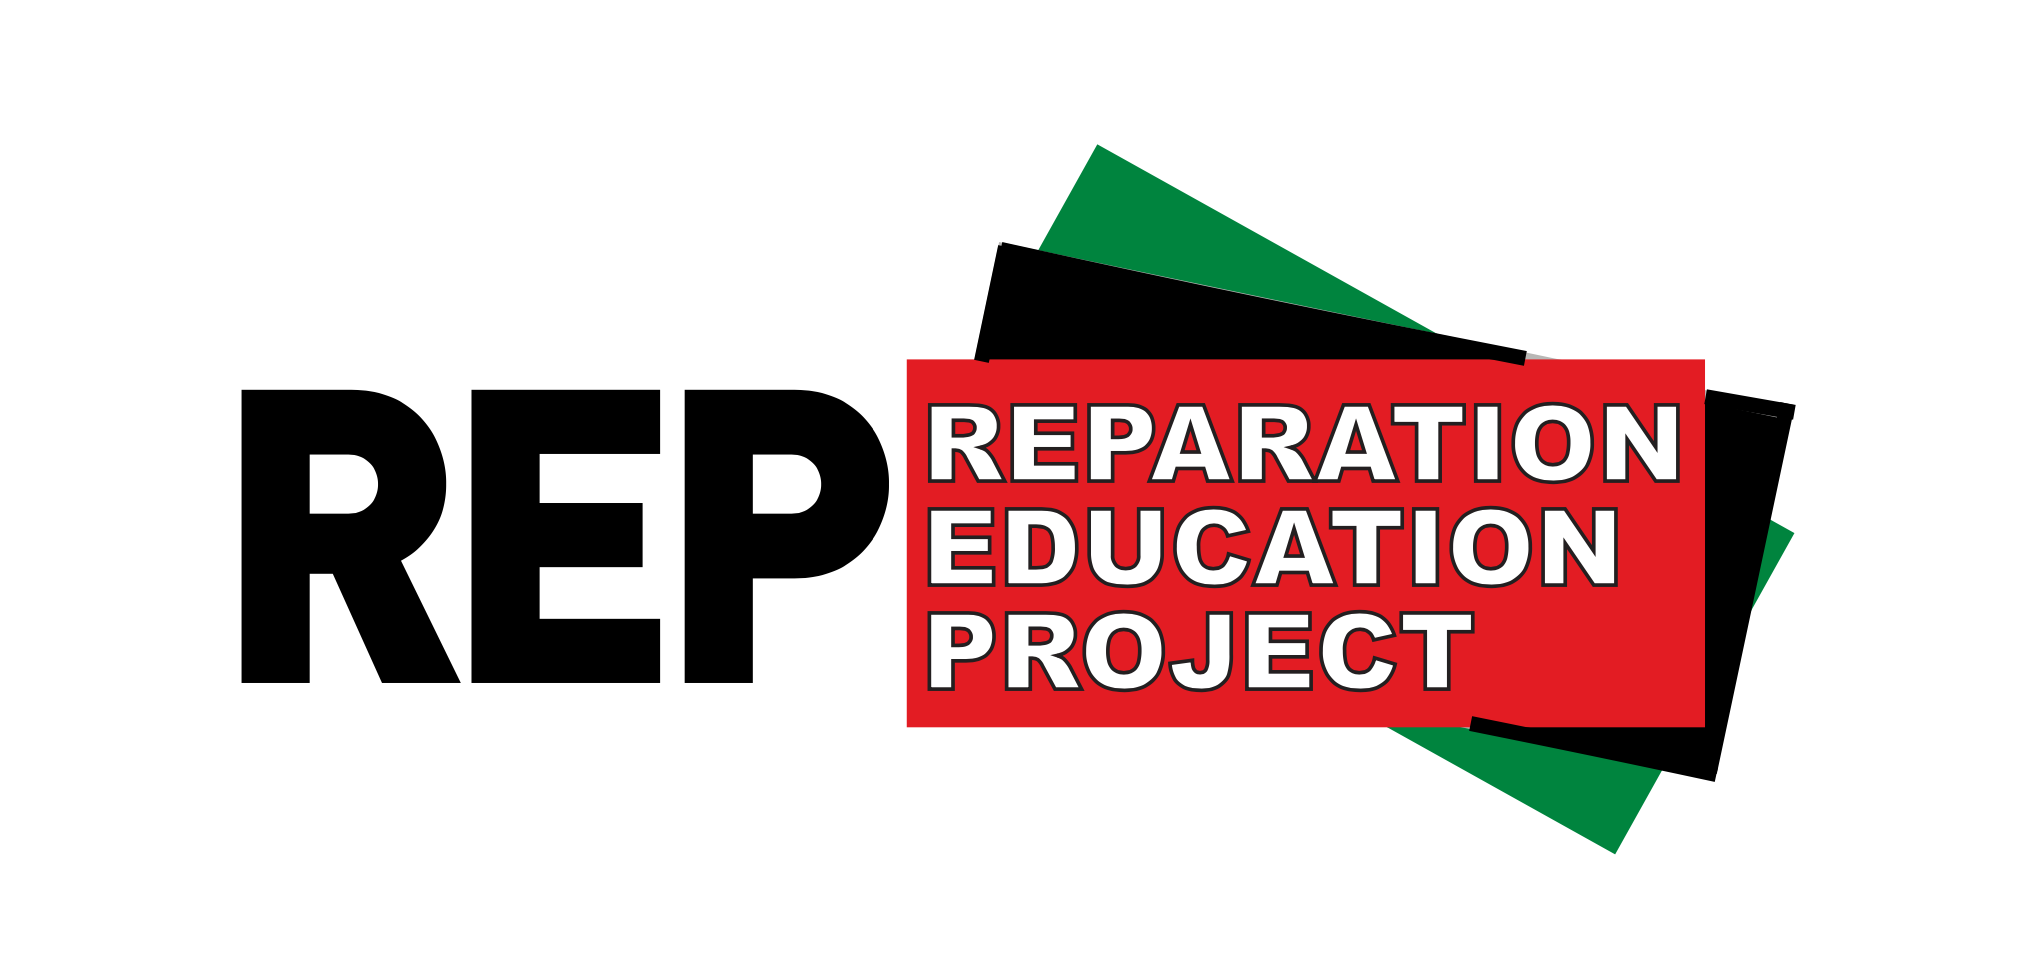 Reparation Education Project logo